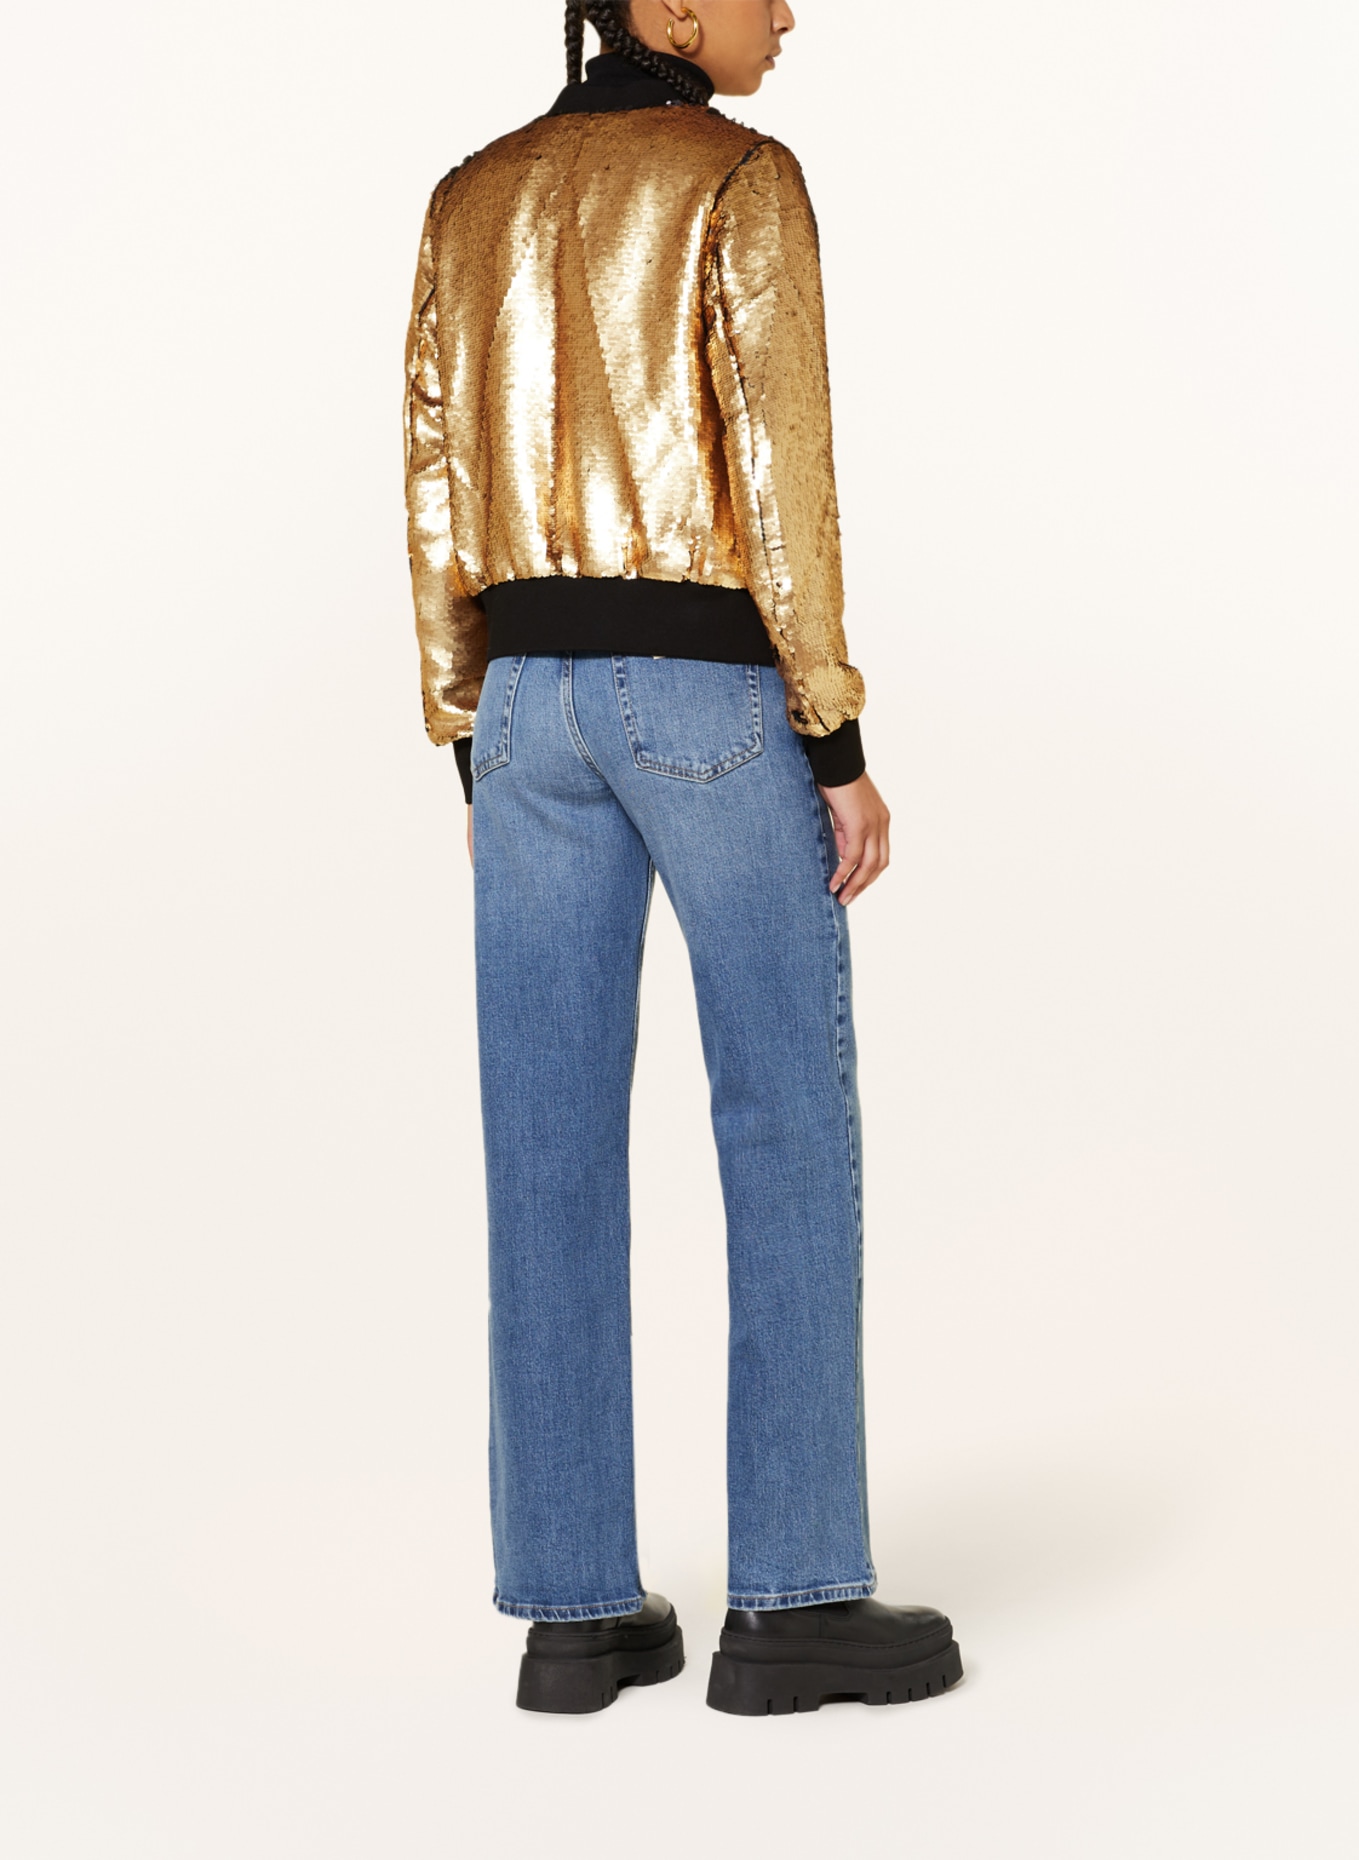 ORIGINAL BOMBERS Bomber jacket with reversible sequins, Color: GOLD (Image 3)